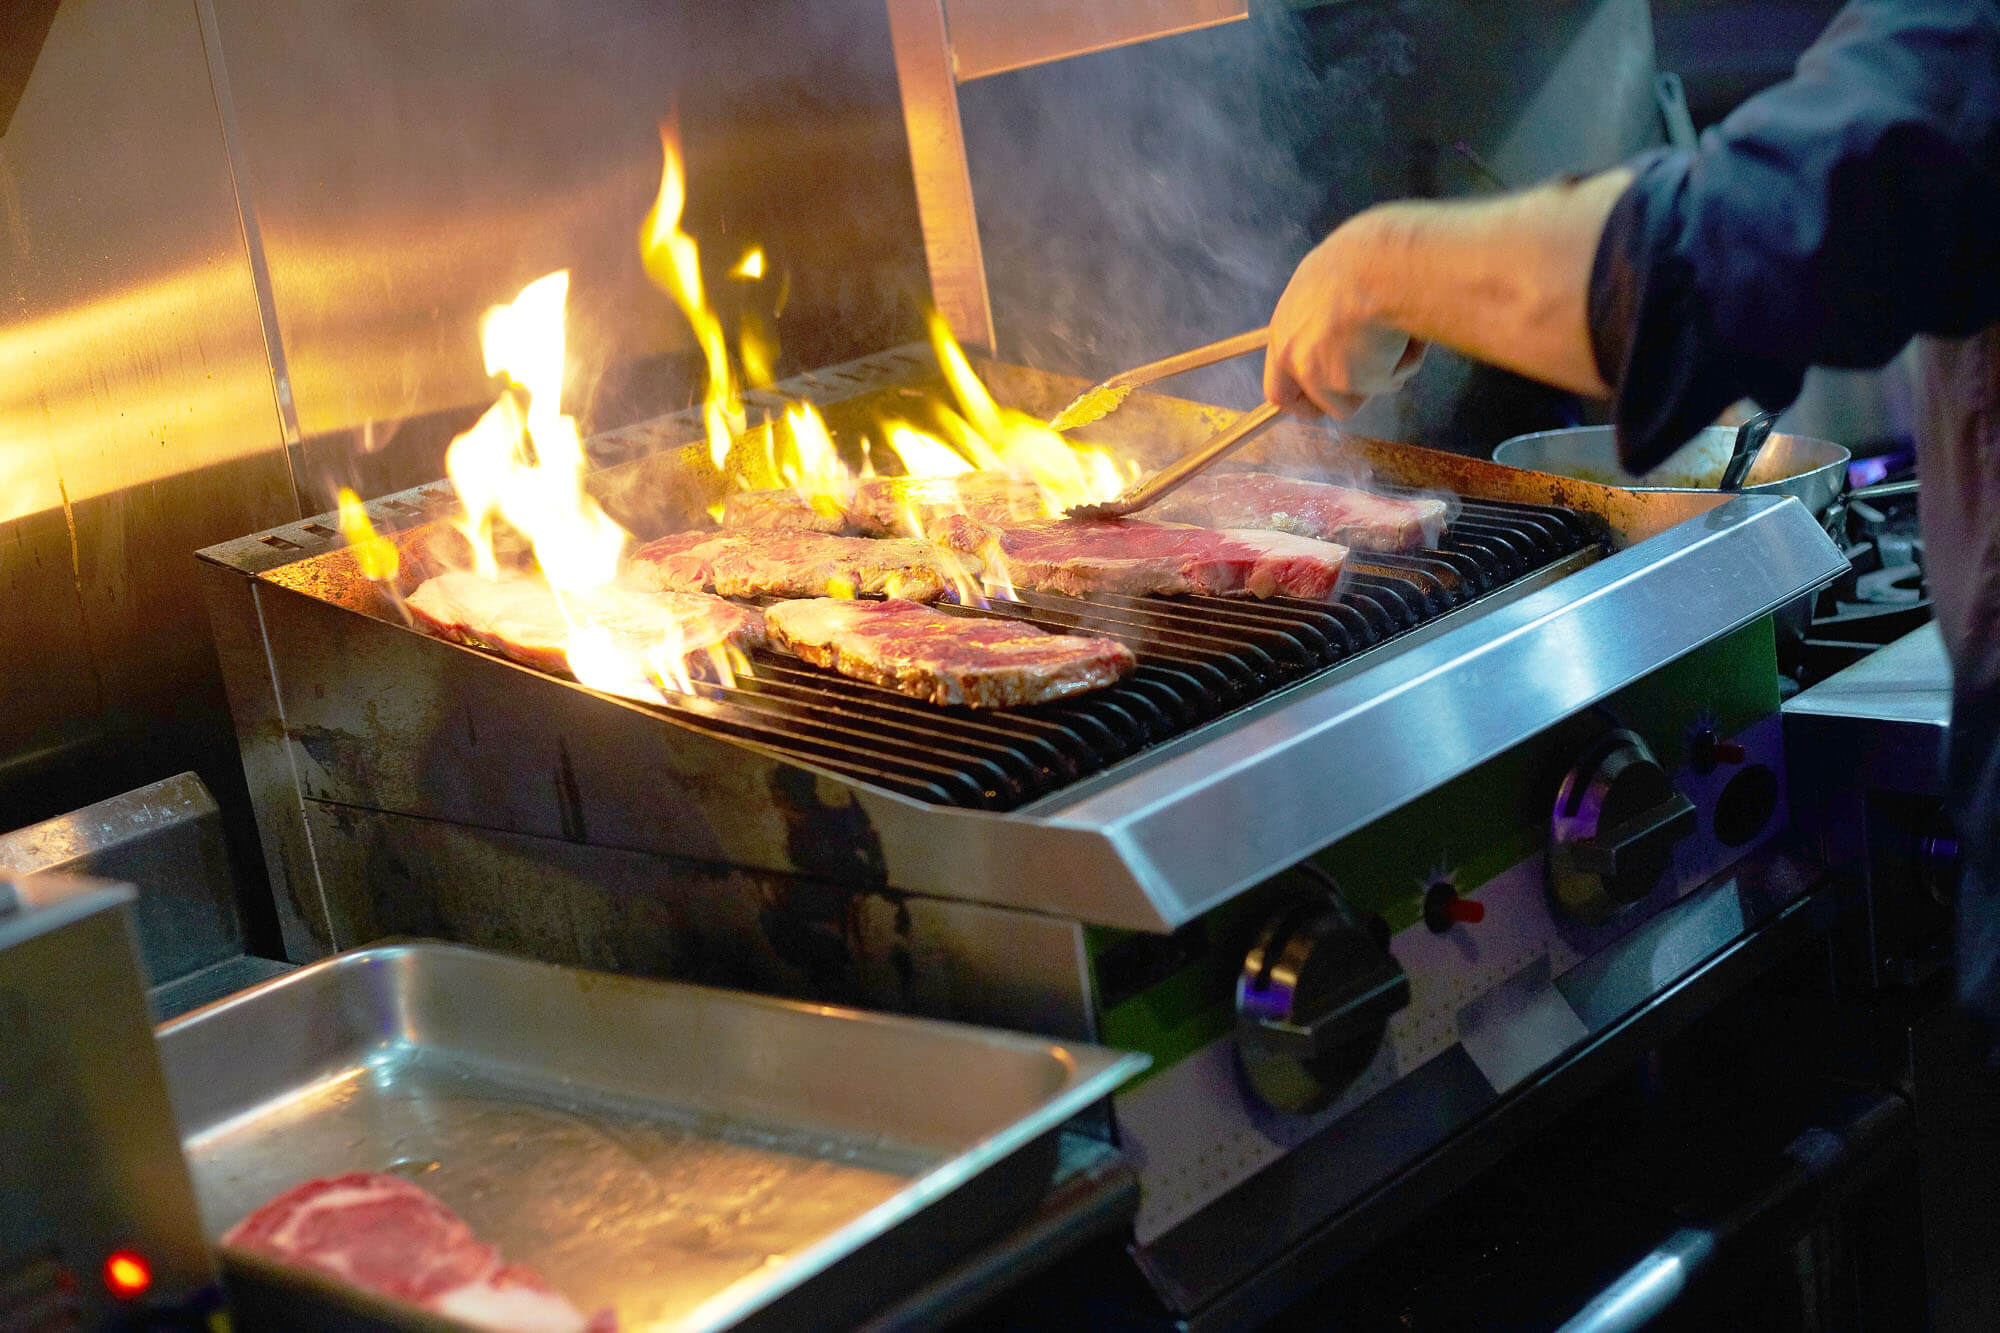 Chef grilling steaks in commercial kitchen